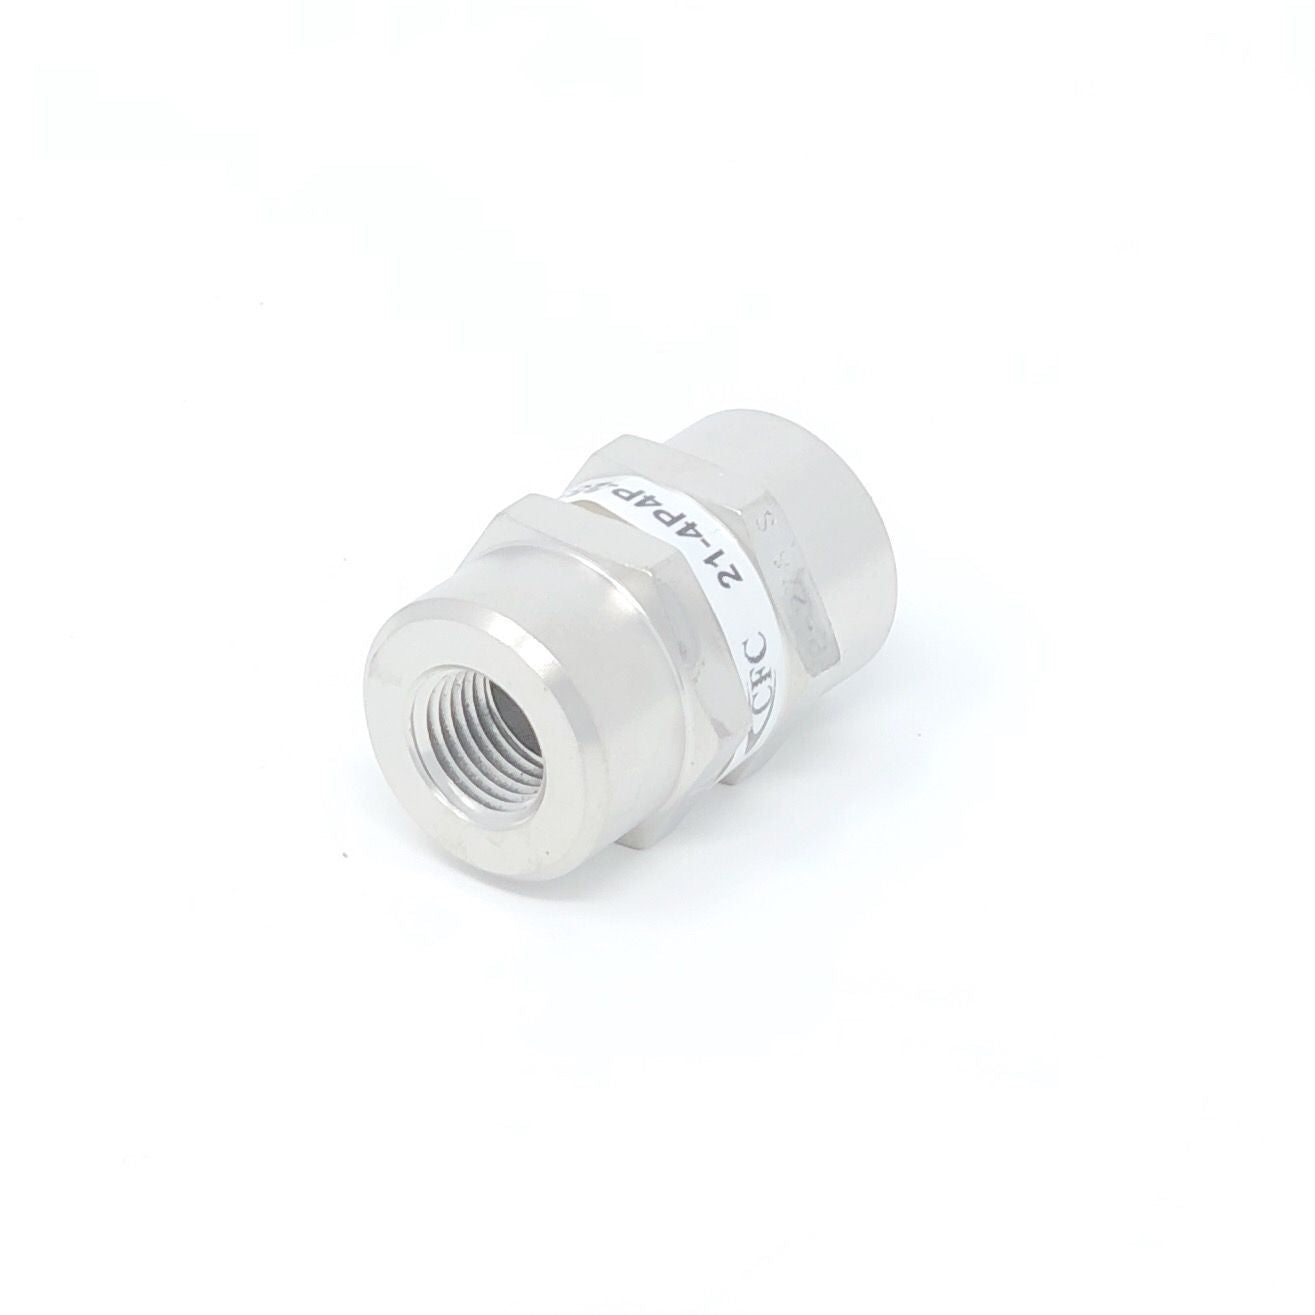 21-12S12S-100S : Chase High Pressure Inline Filter, 3000psi, #12 SAE (3/4"), 100 Micron, No Visual Indicator, With Bypass